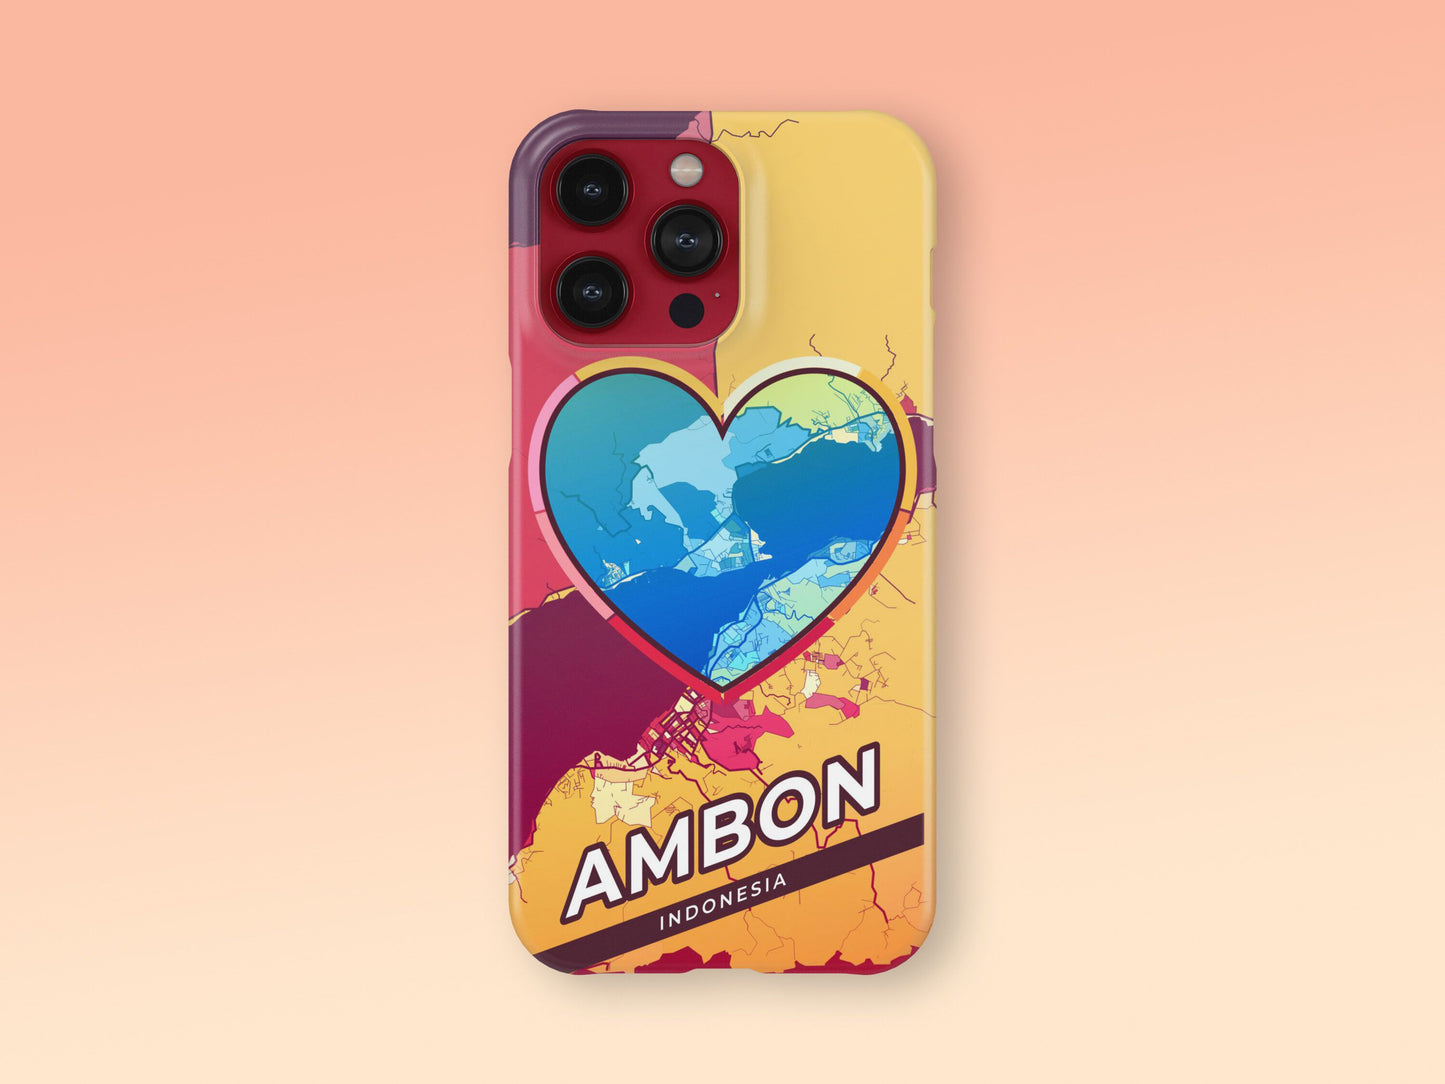 Ambon Indonesia slim phone case with colorful icon. Birthday, wedding or housewarming gift. Couple match cases. 2